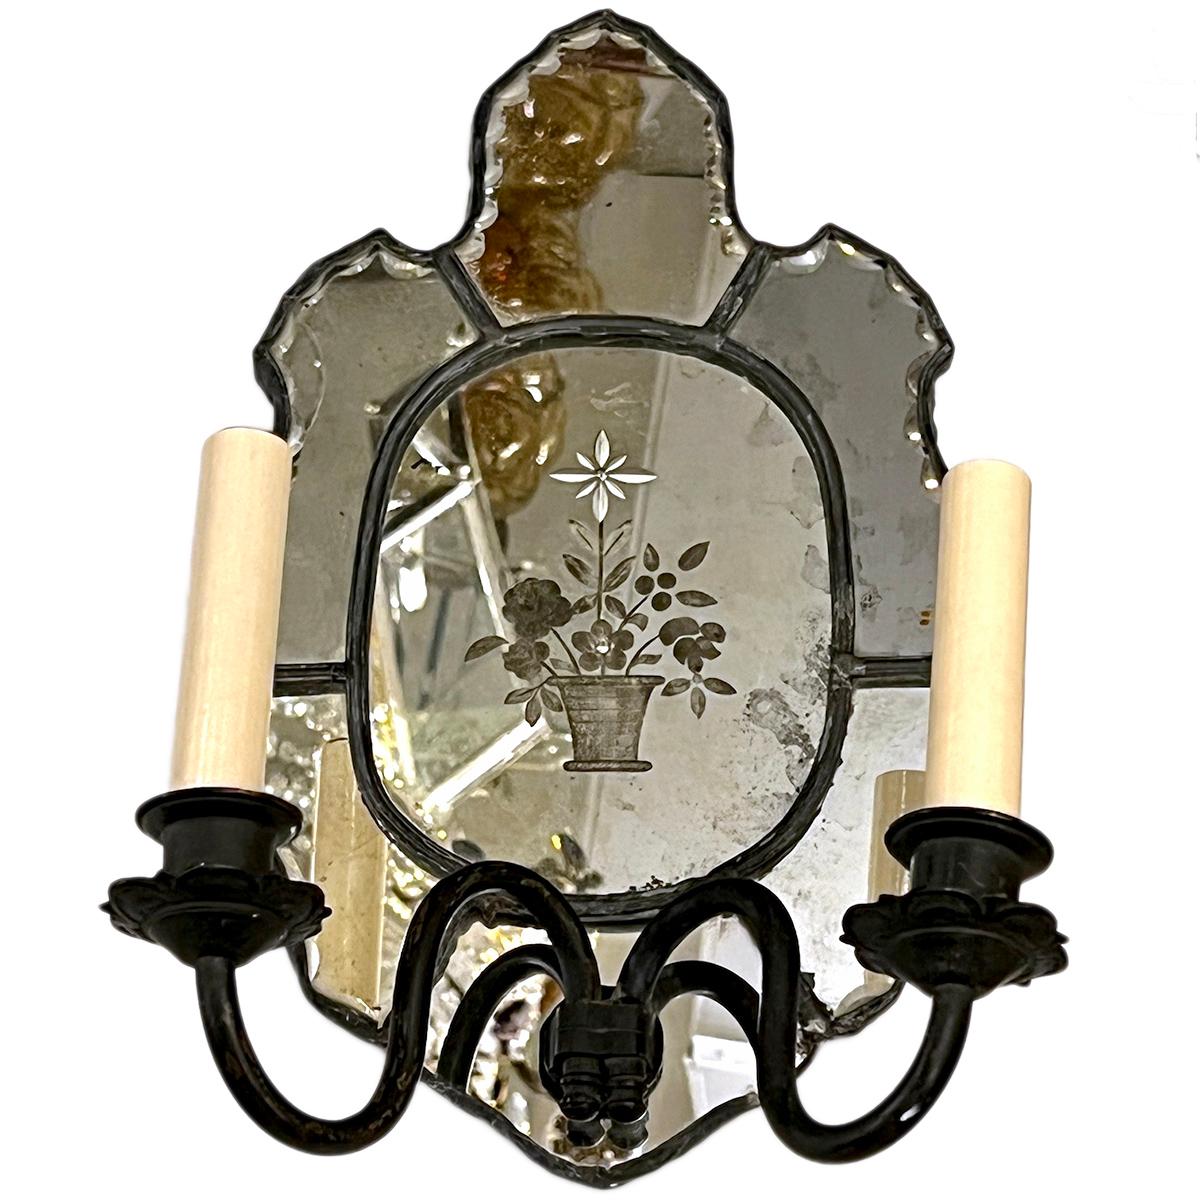 Set of four Italian circa 1940s etched mirror sconces with floral motif. Sold per pair.

Measurements:
Height: 16